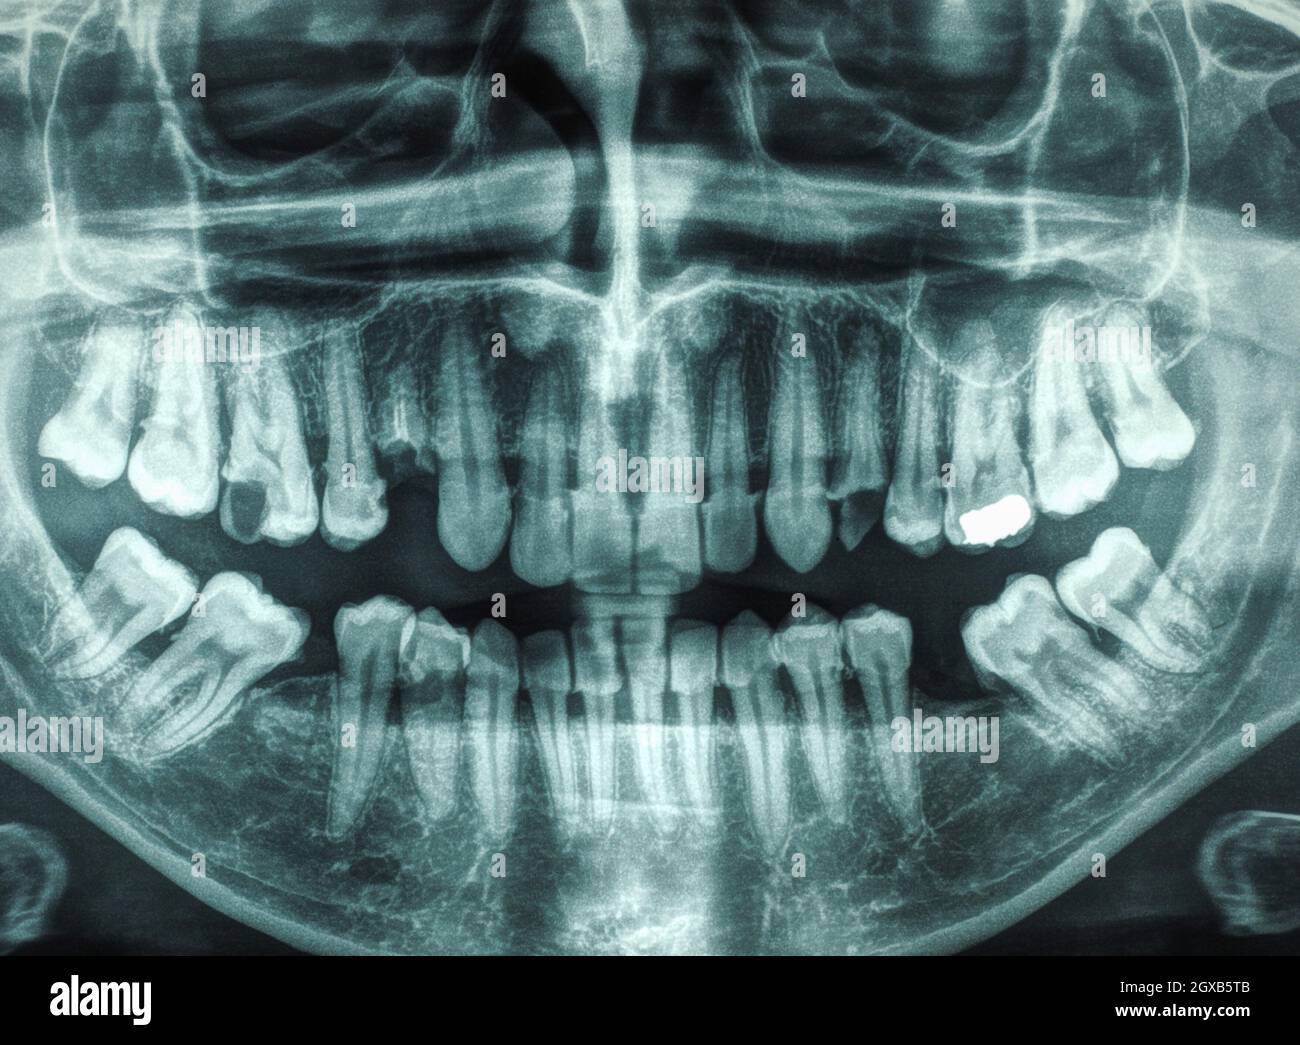 X ray of human mouth with teeth bones. Stock Photo